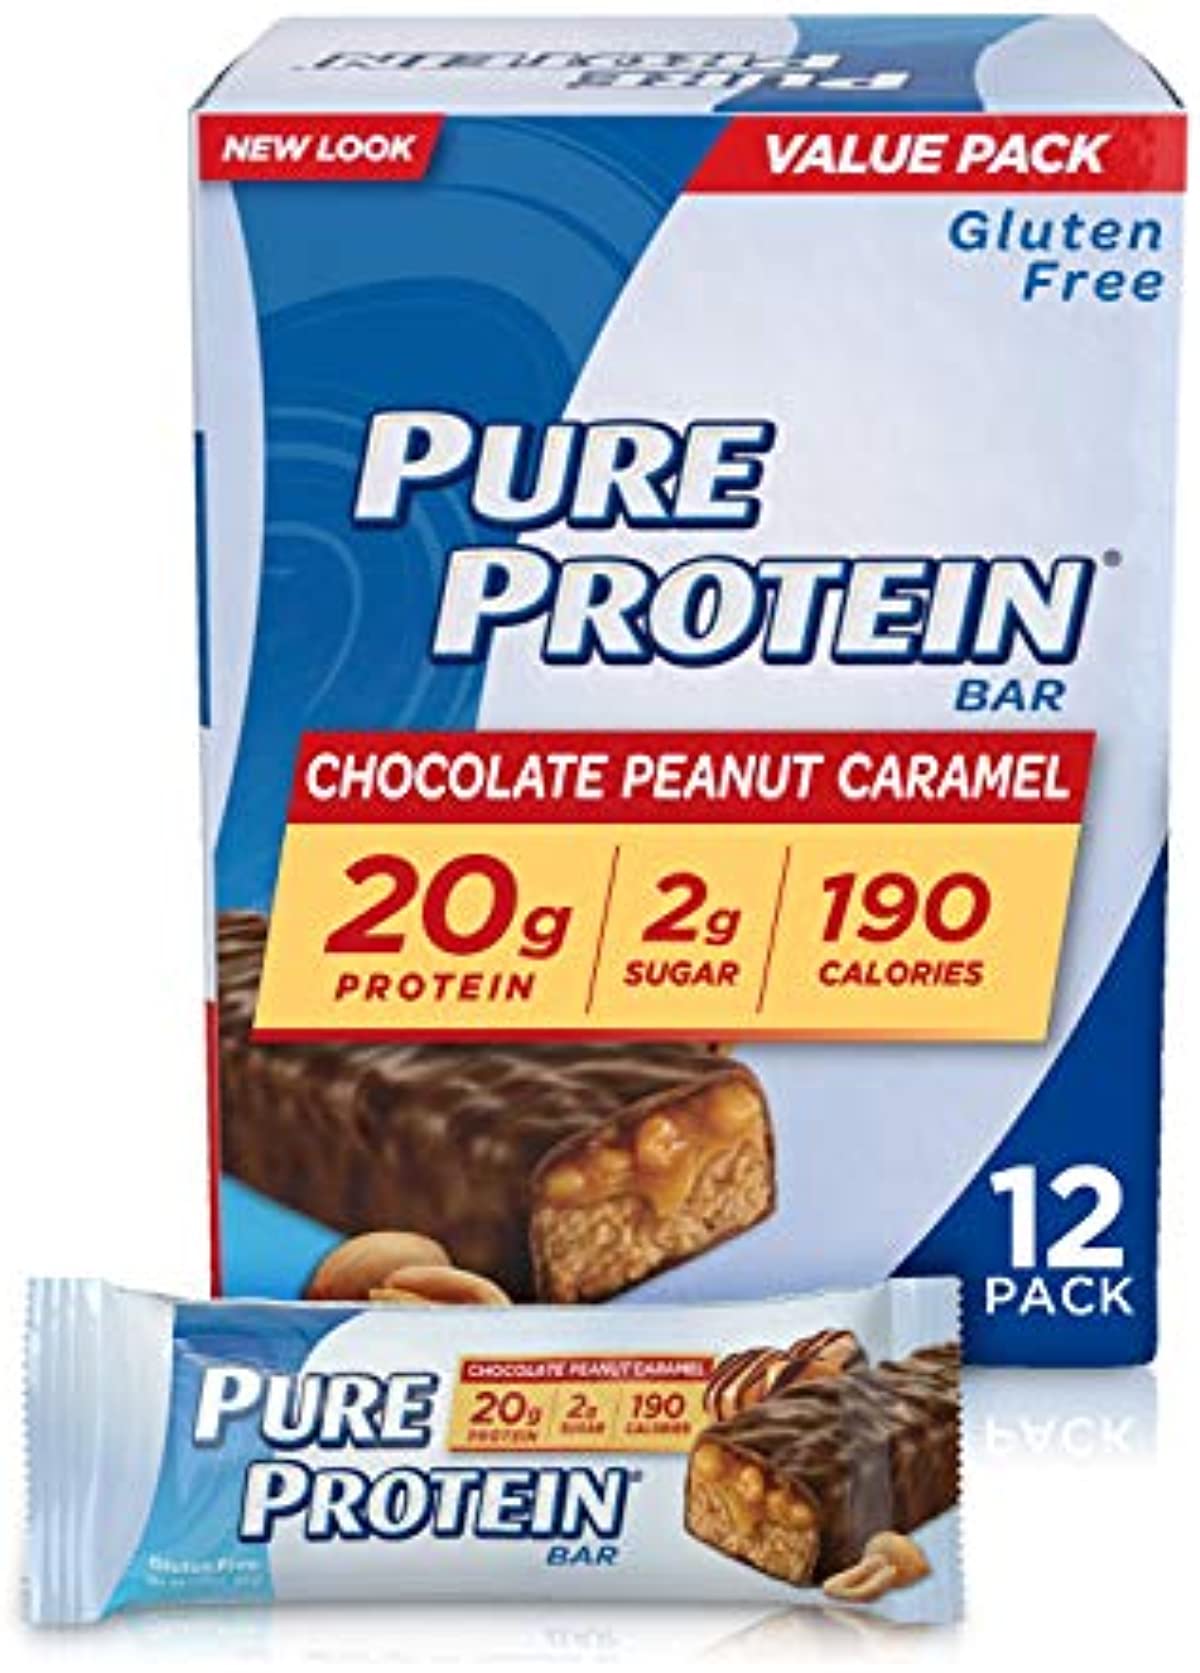 Pure Protein Bars, High Protein, Nutritious Snacks to Support Energy, Low Sugar, Gluten Free, Chocolate Peanut Caramel, 1.76 oz., 12 Count